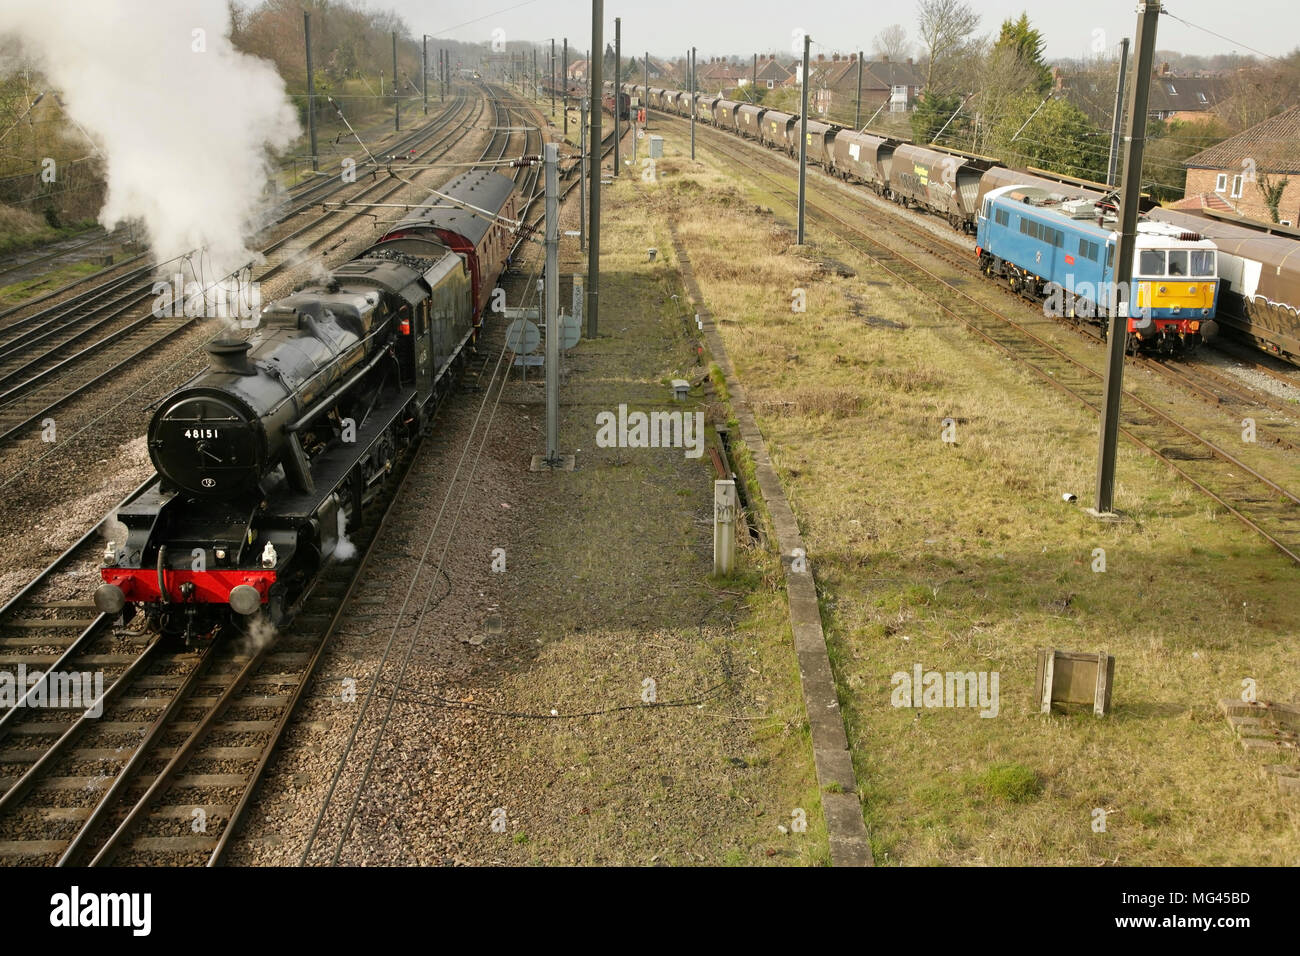 Preserved LMS Stanier class 8F steam locomotive no. 48151 and Class 86 loco 86259 'Les Ross' at Holgate sidings, York, UK. Stock Photo